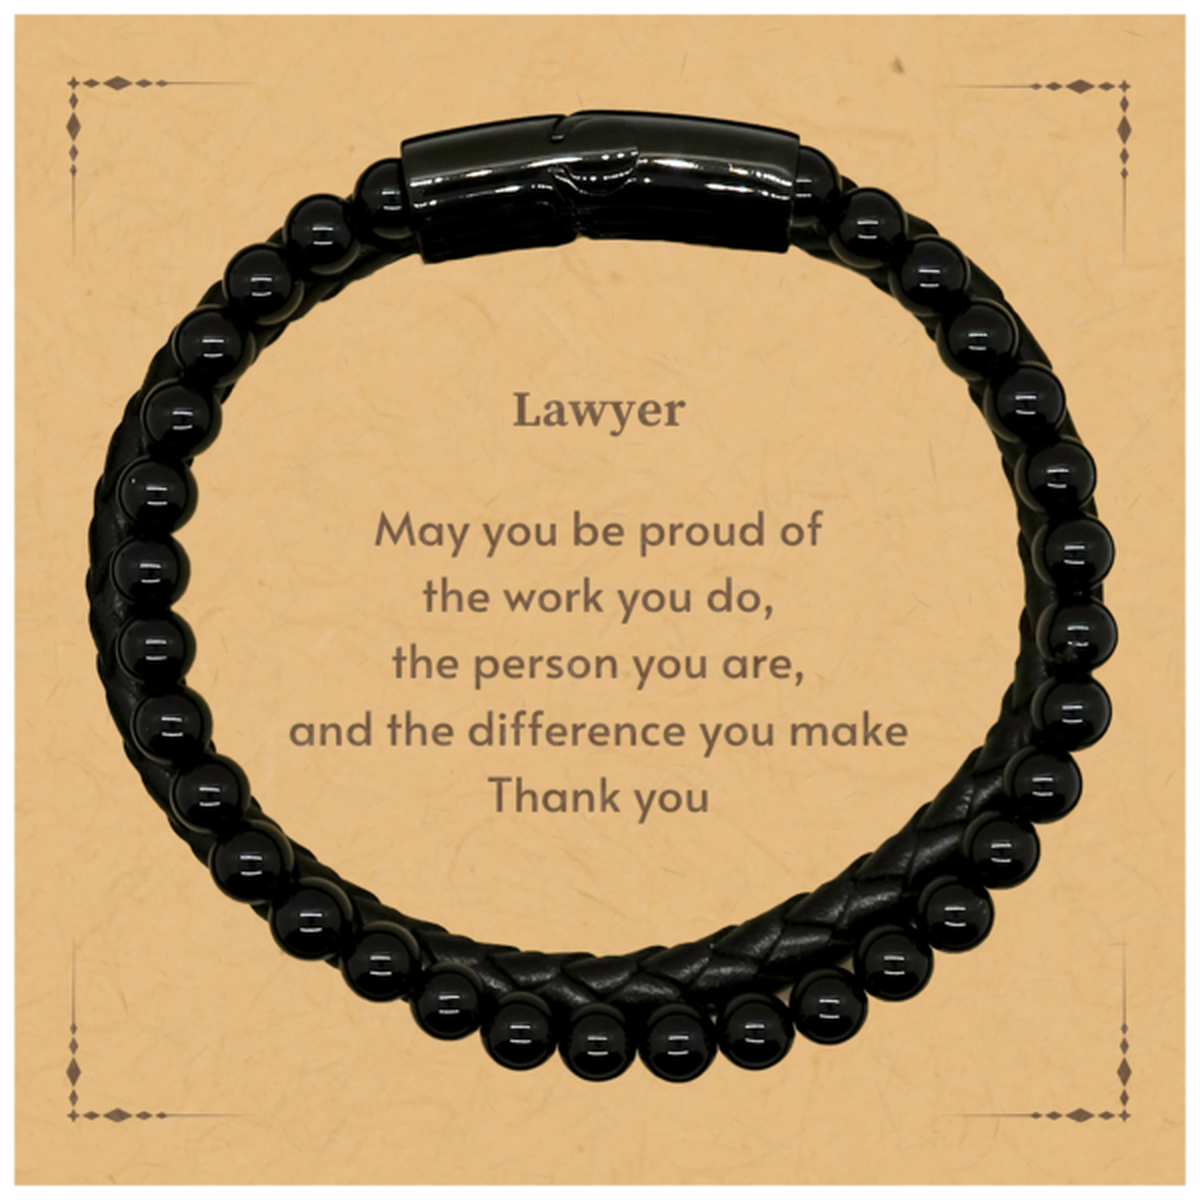 Heartwarming Stone Leather Bracelets Retirement Coworkers Gifts for Lawyer, Lawyer May You be proud of the work you do, the person you are Gifts for Boss Men Women Friends